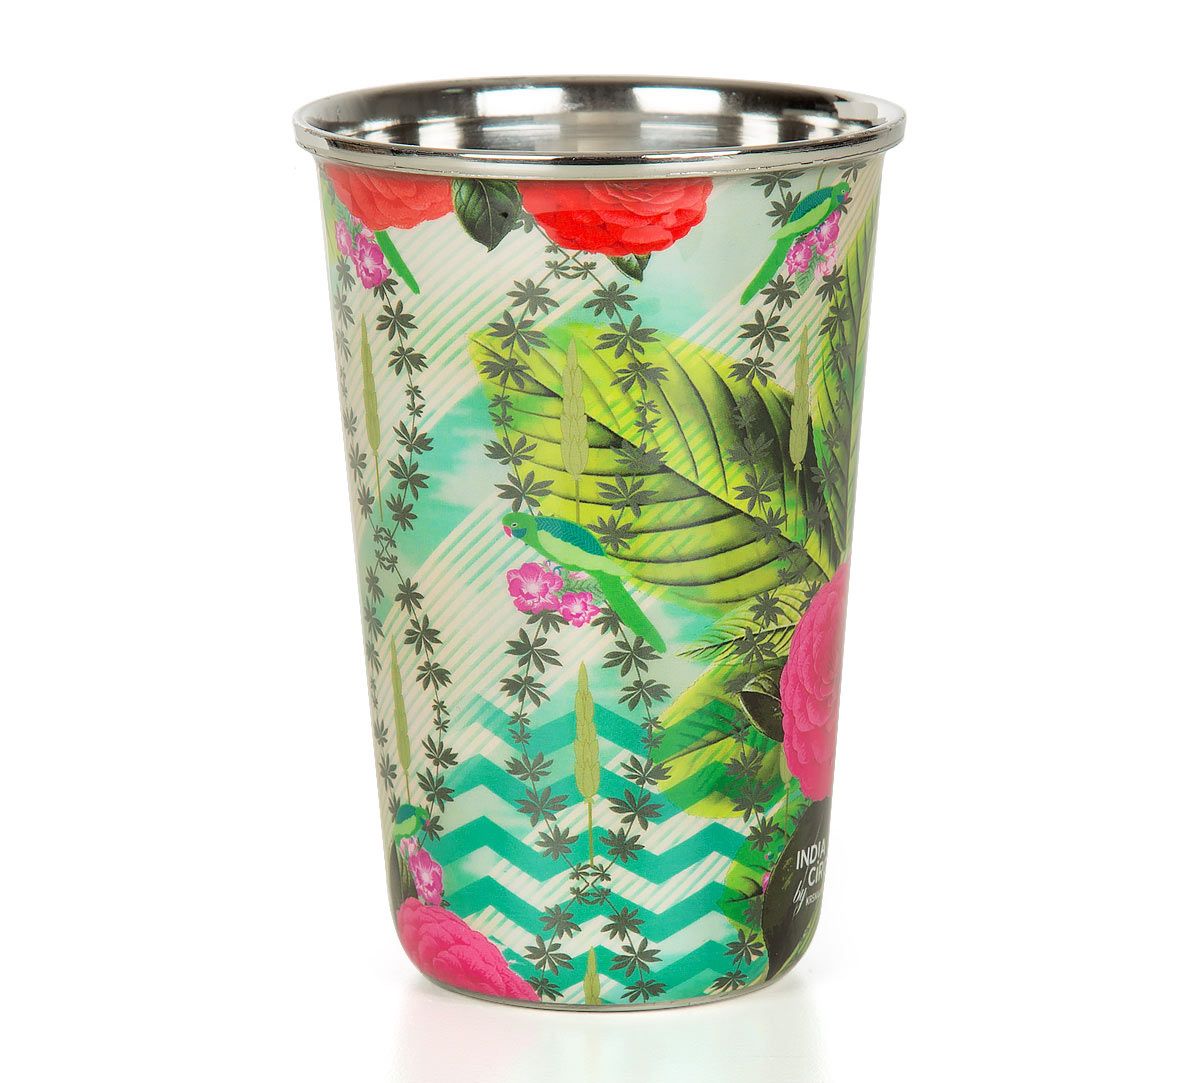 India Circus Herbs of Captivation Steel Tumbler Set of 2